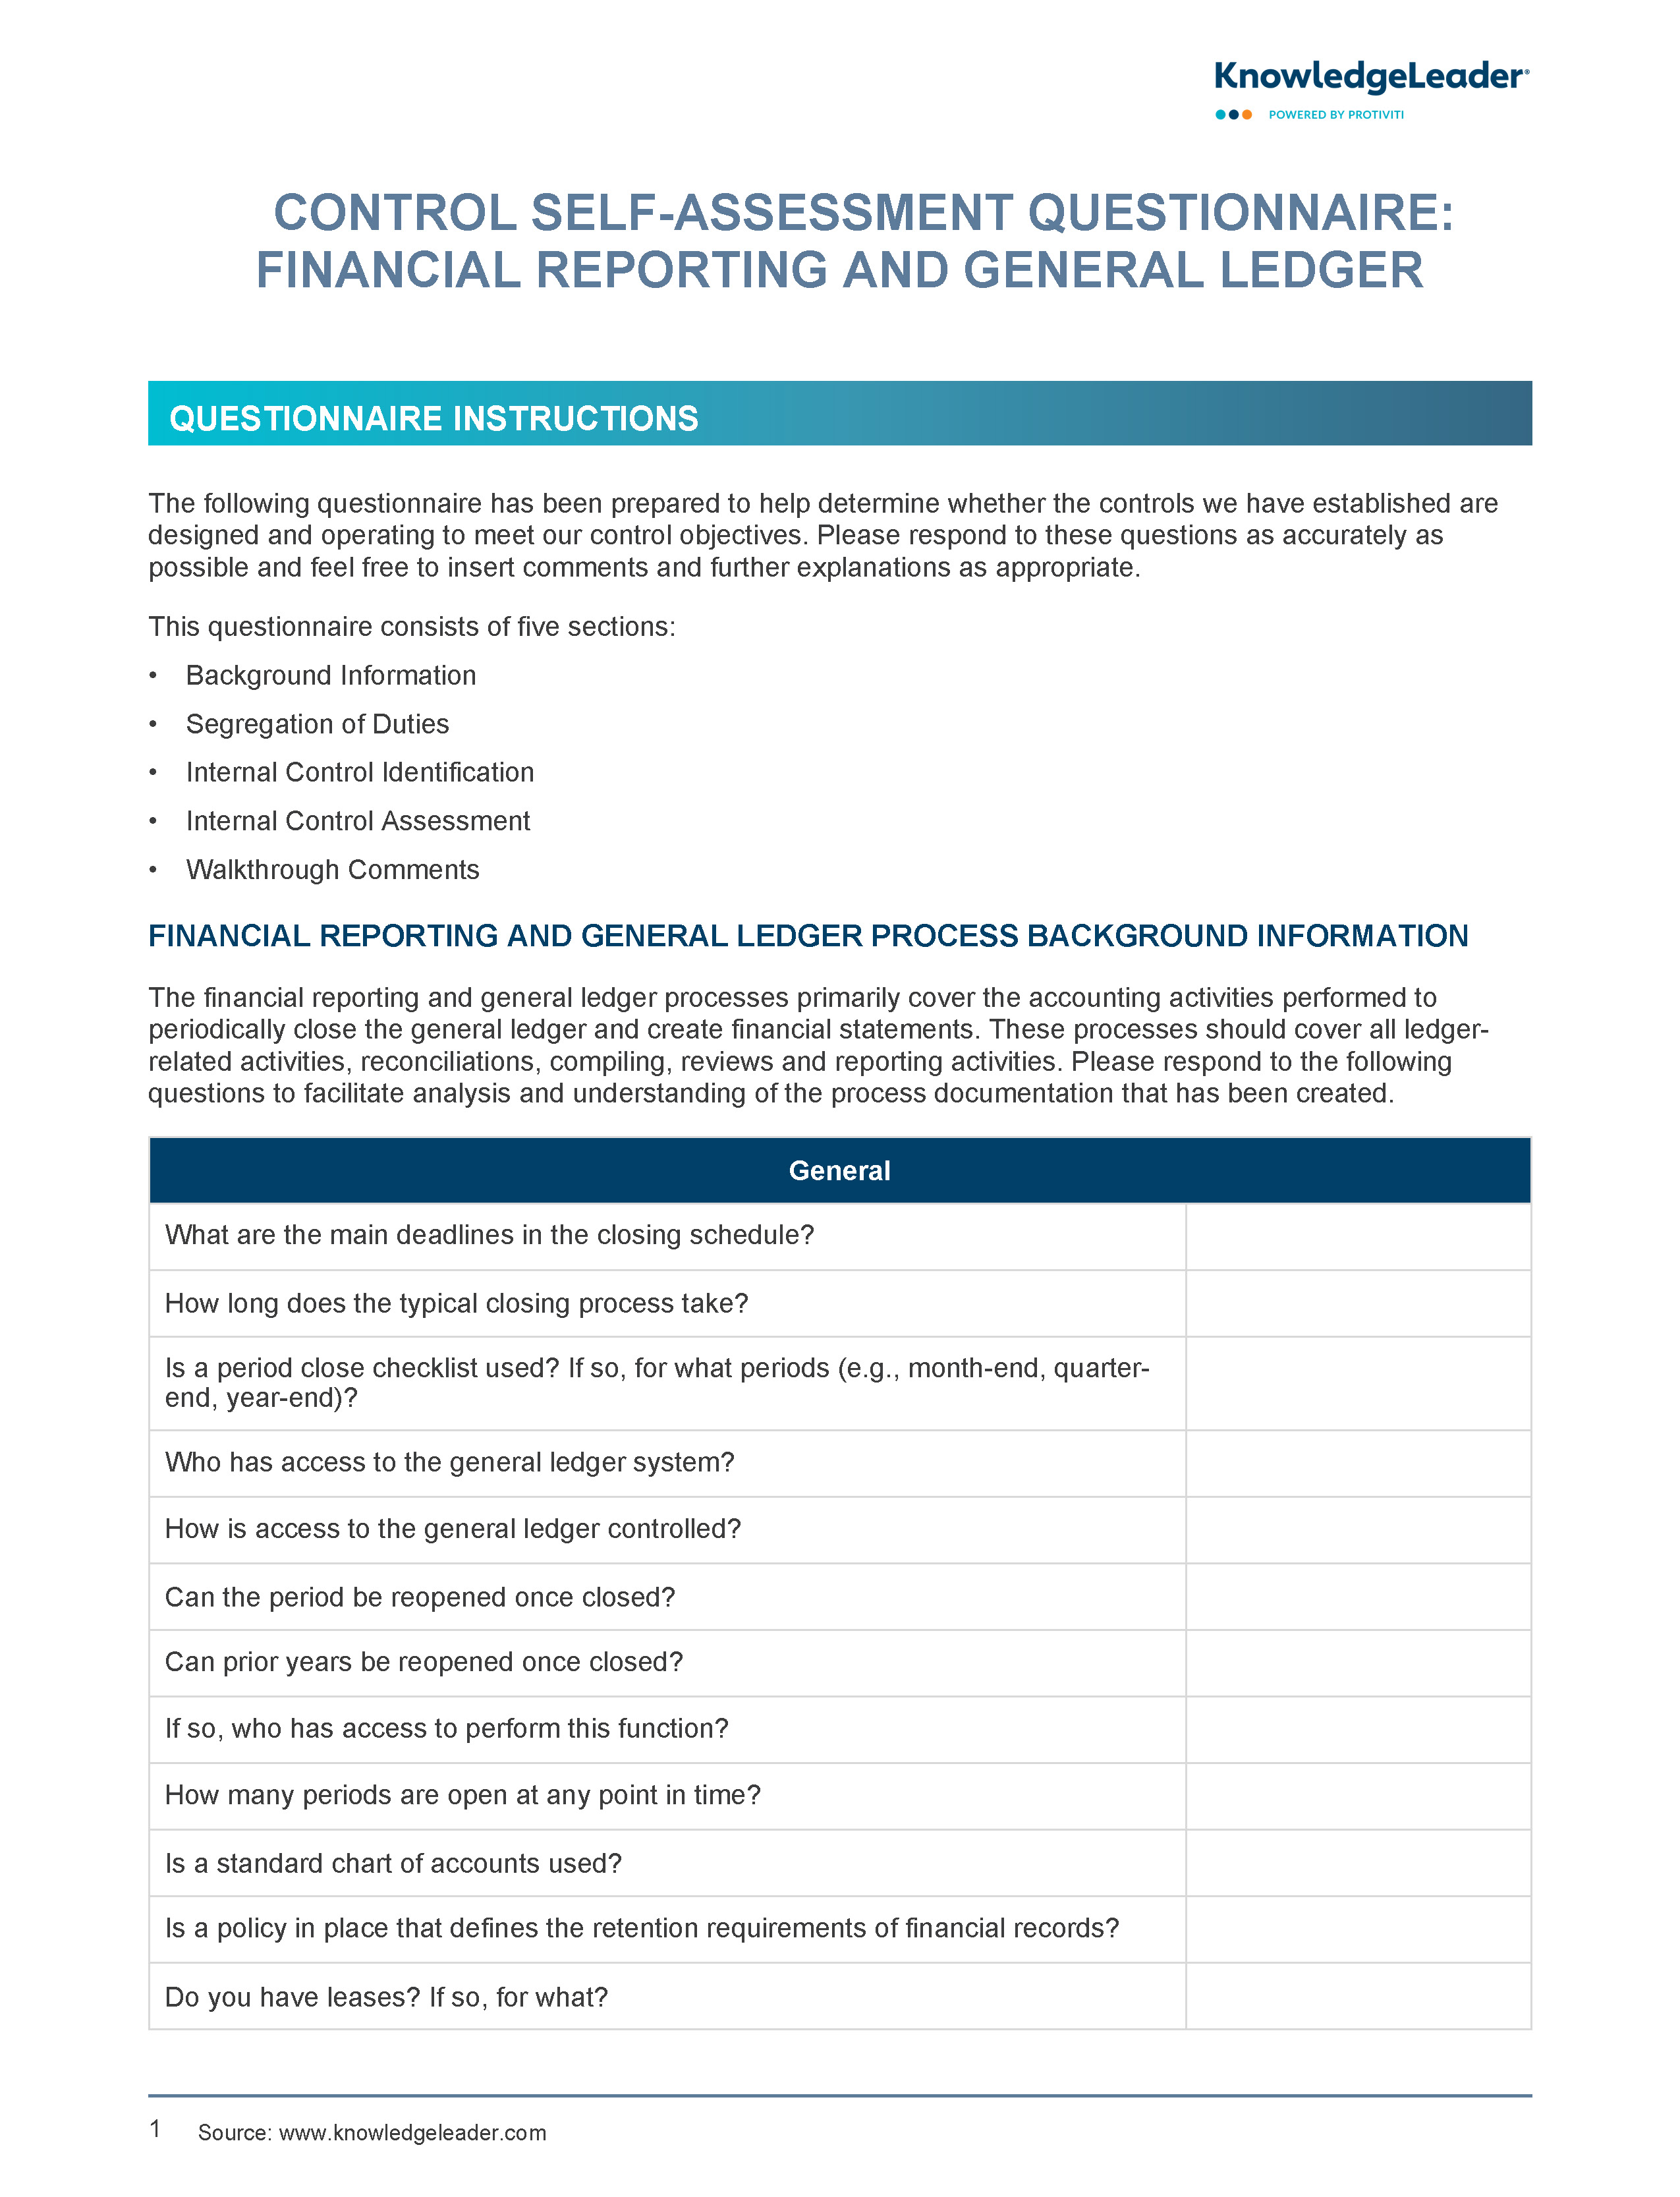 Screenshot of the first page of Control Self-Assessment Questionnaire - Financial Reporting and General Ledger